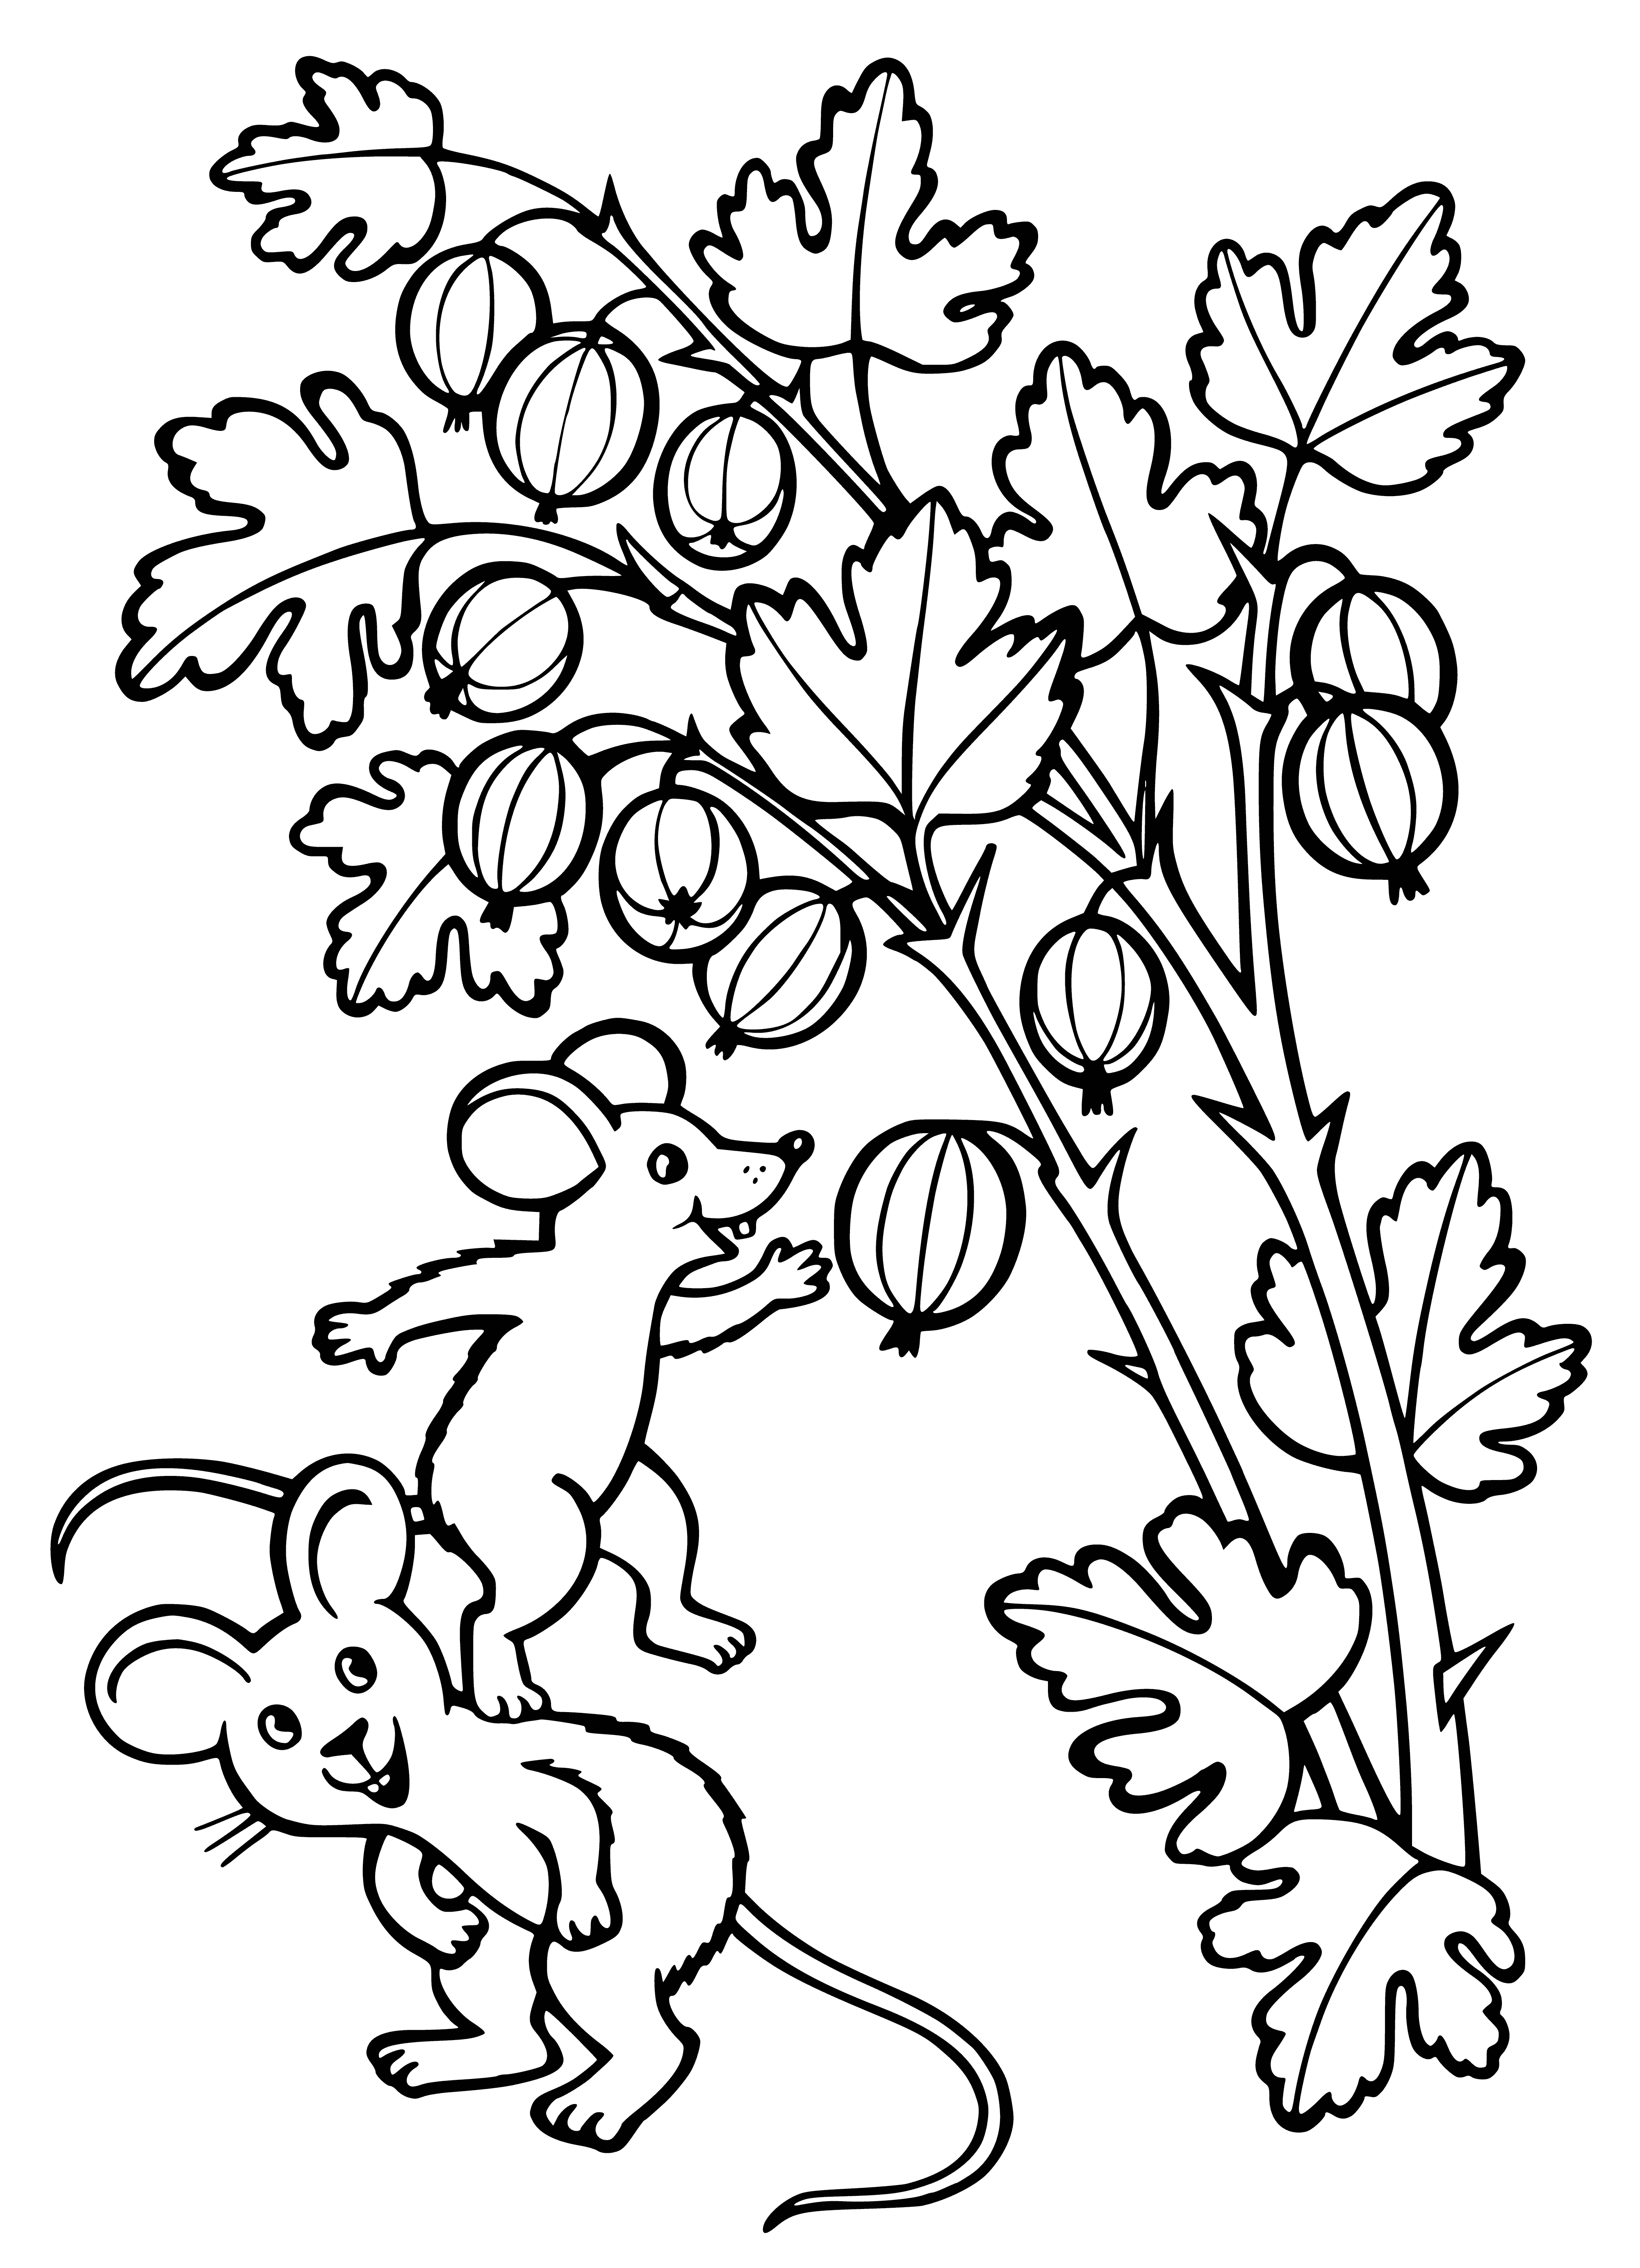 coloring page: A gooseberry is a small, round, green fruit with a bumpy texture & tart, juicy flavor.